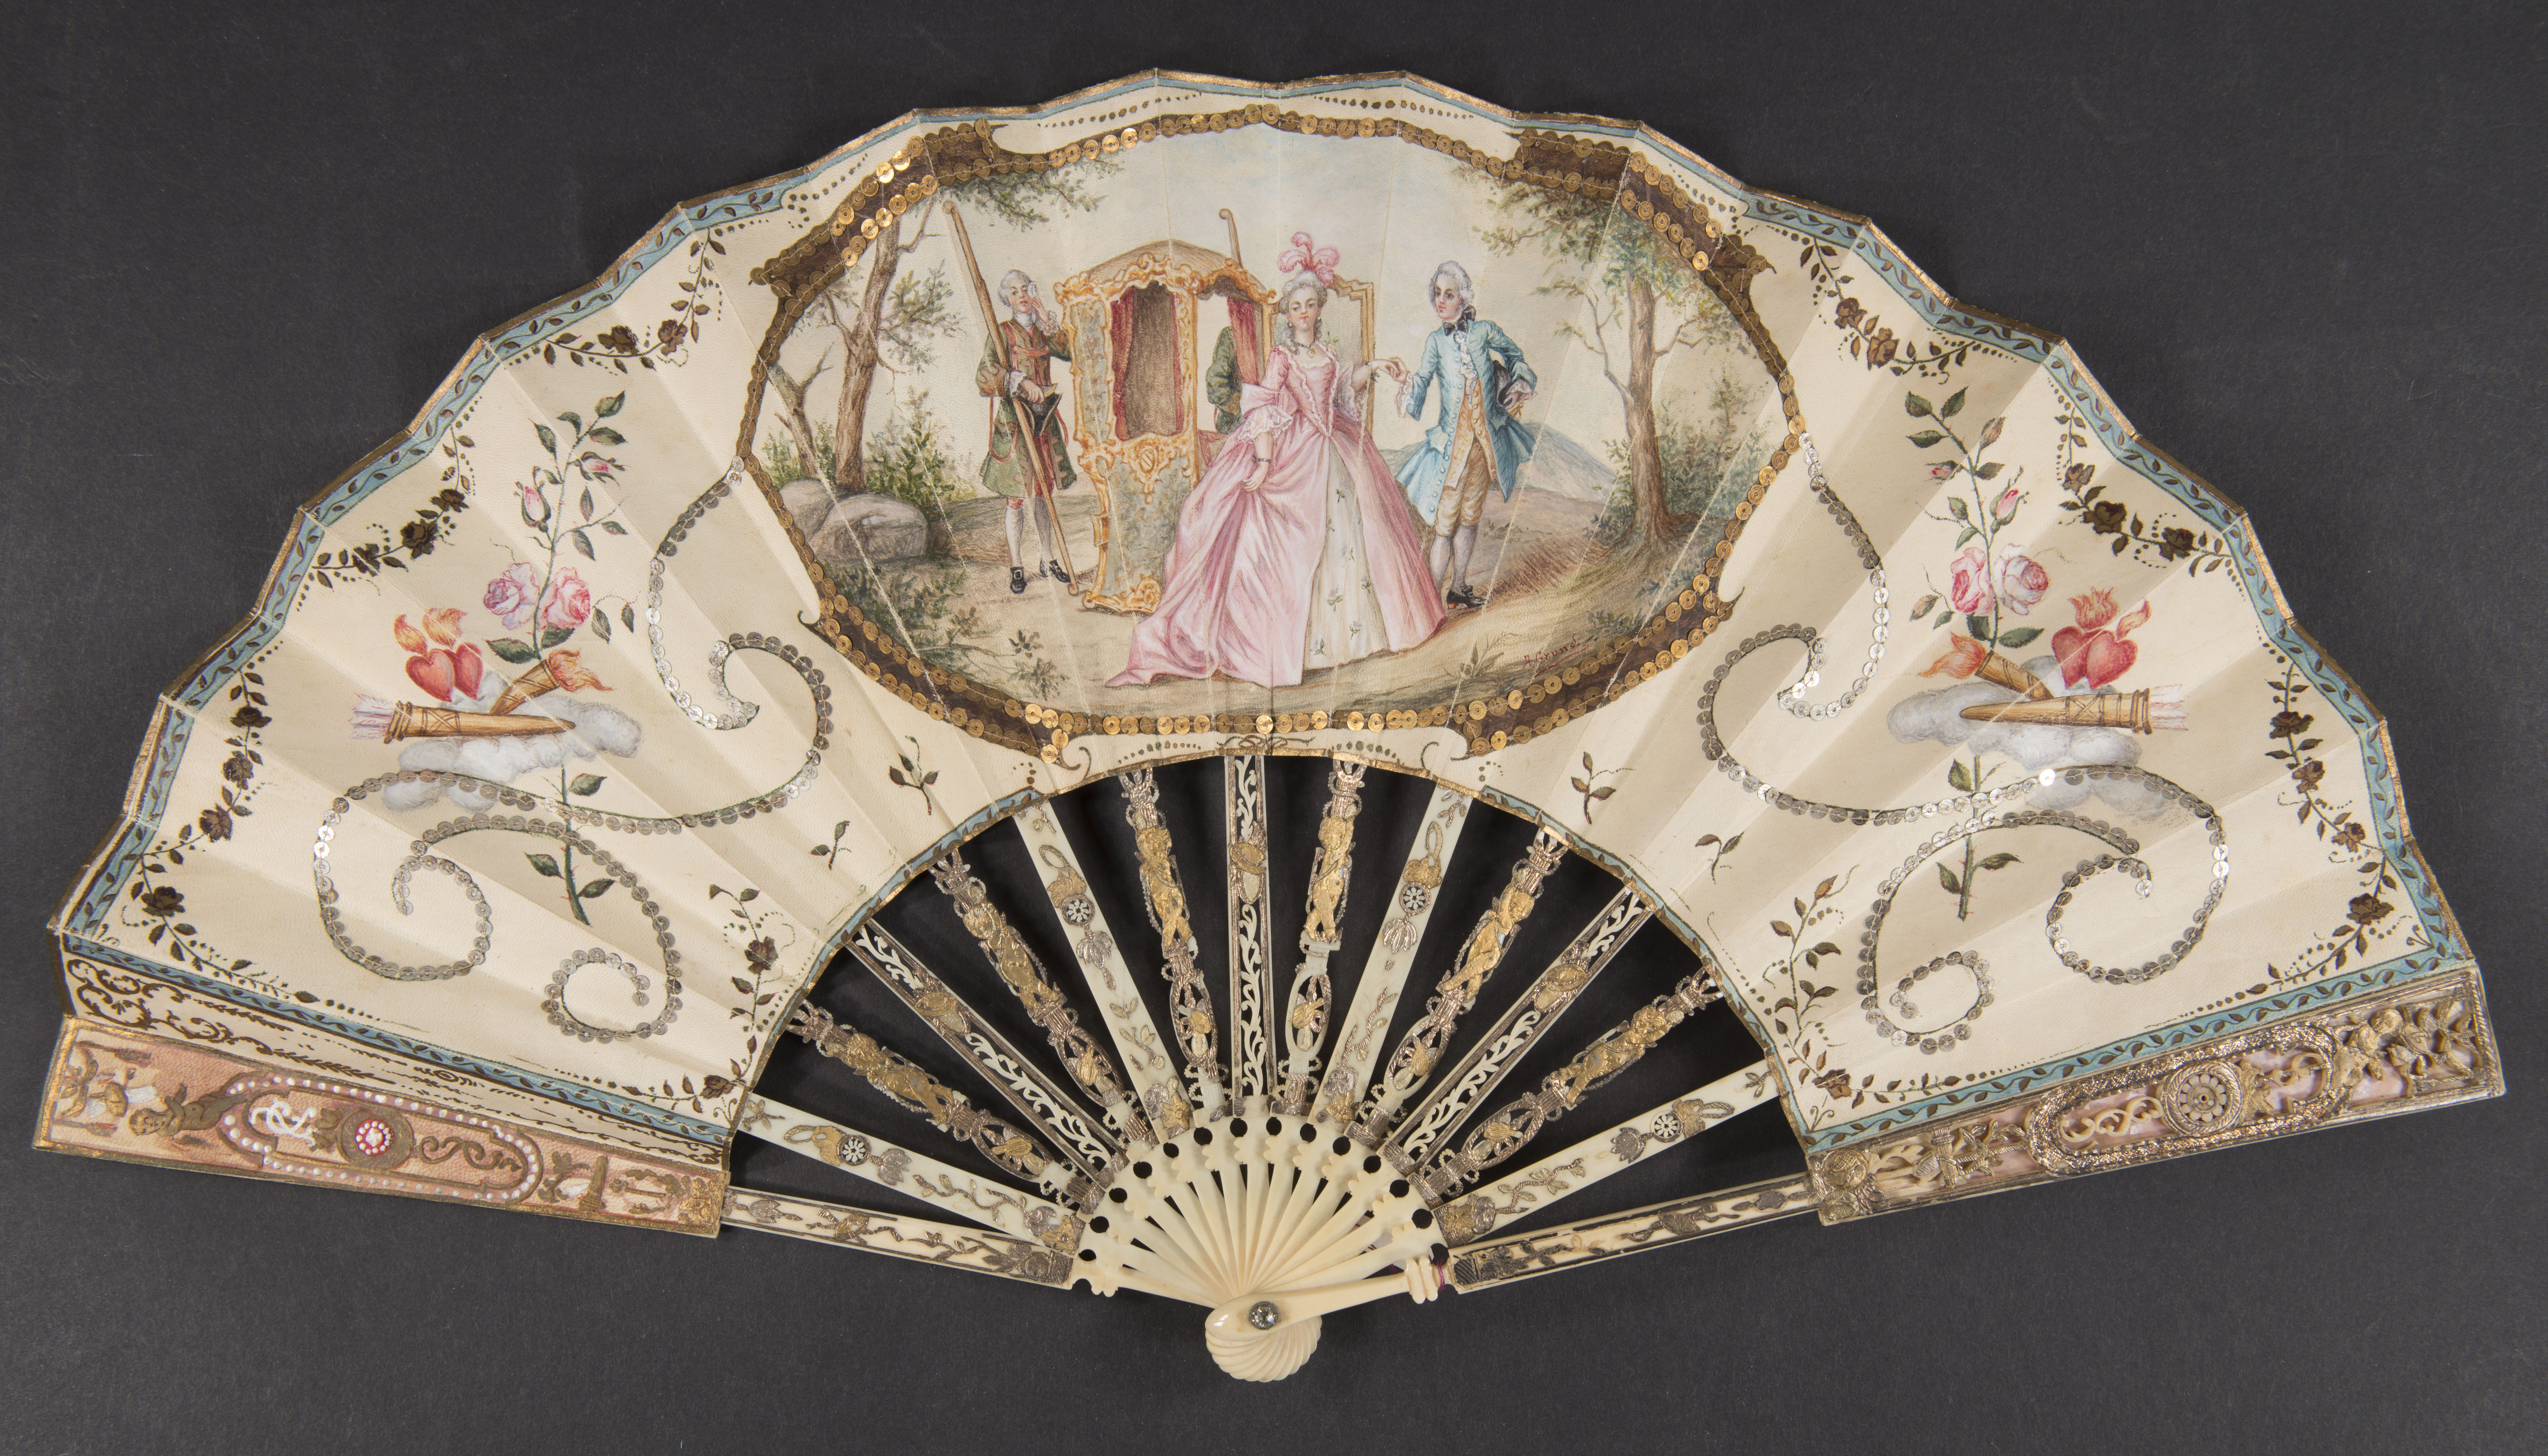 ornate hand fan with a painting of a woman in a luxurious pink dress accompanied by two men in dress attire